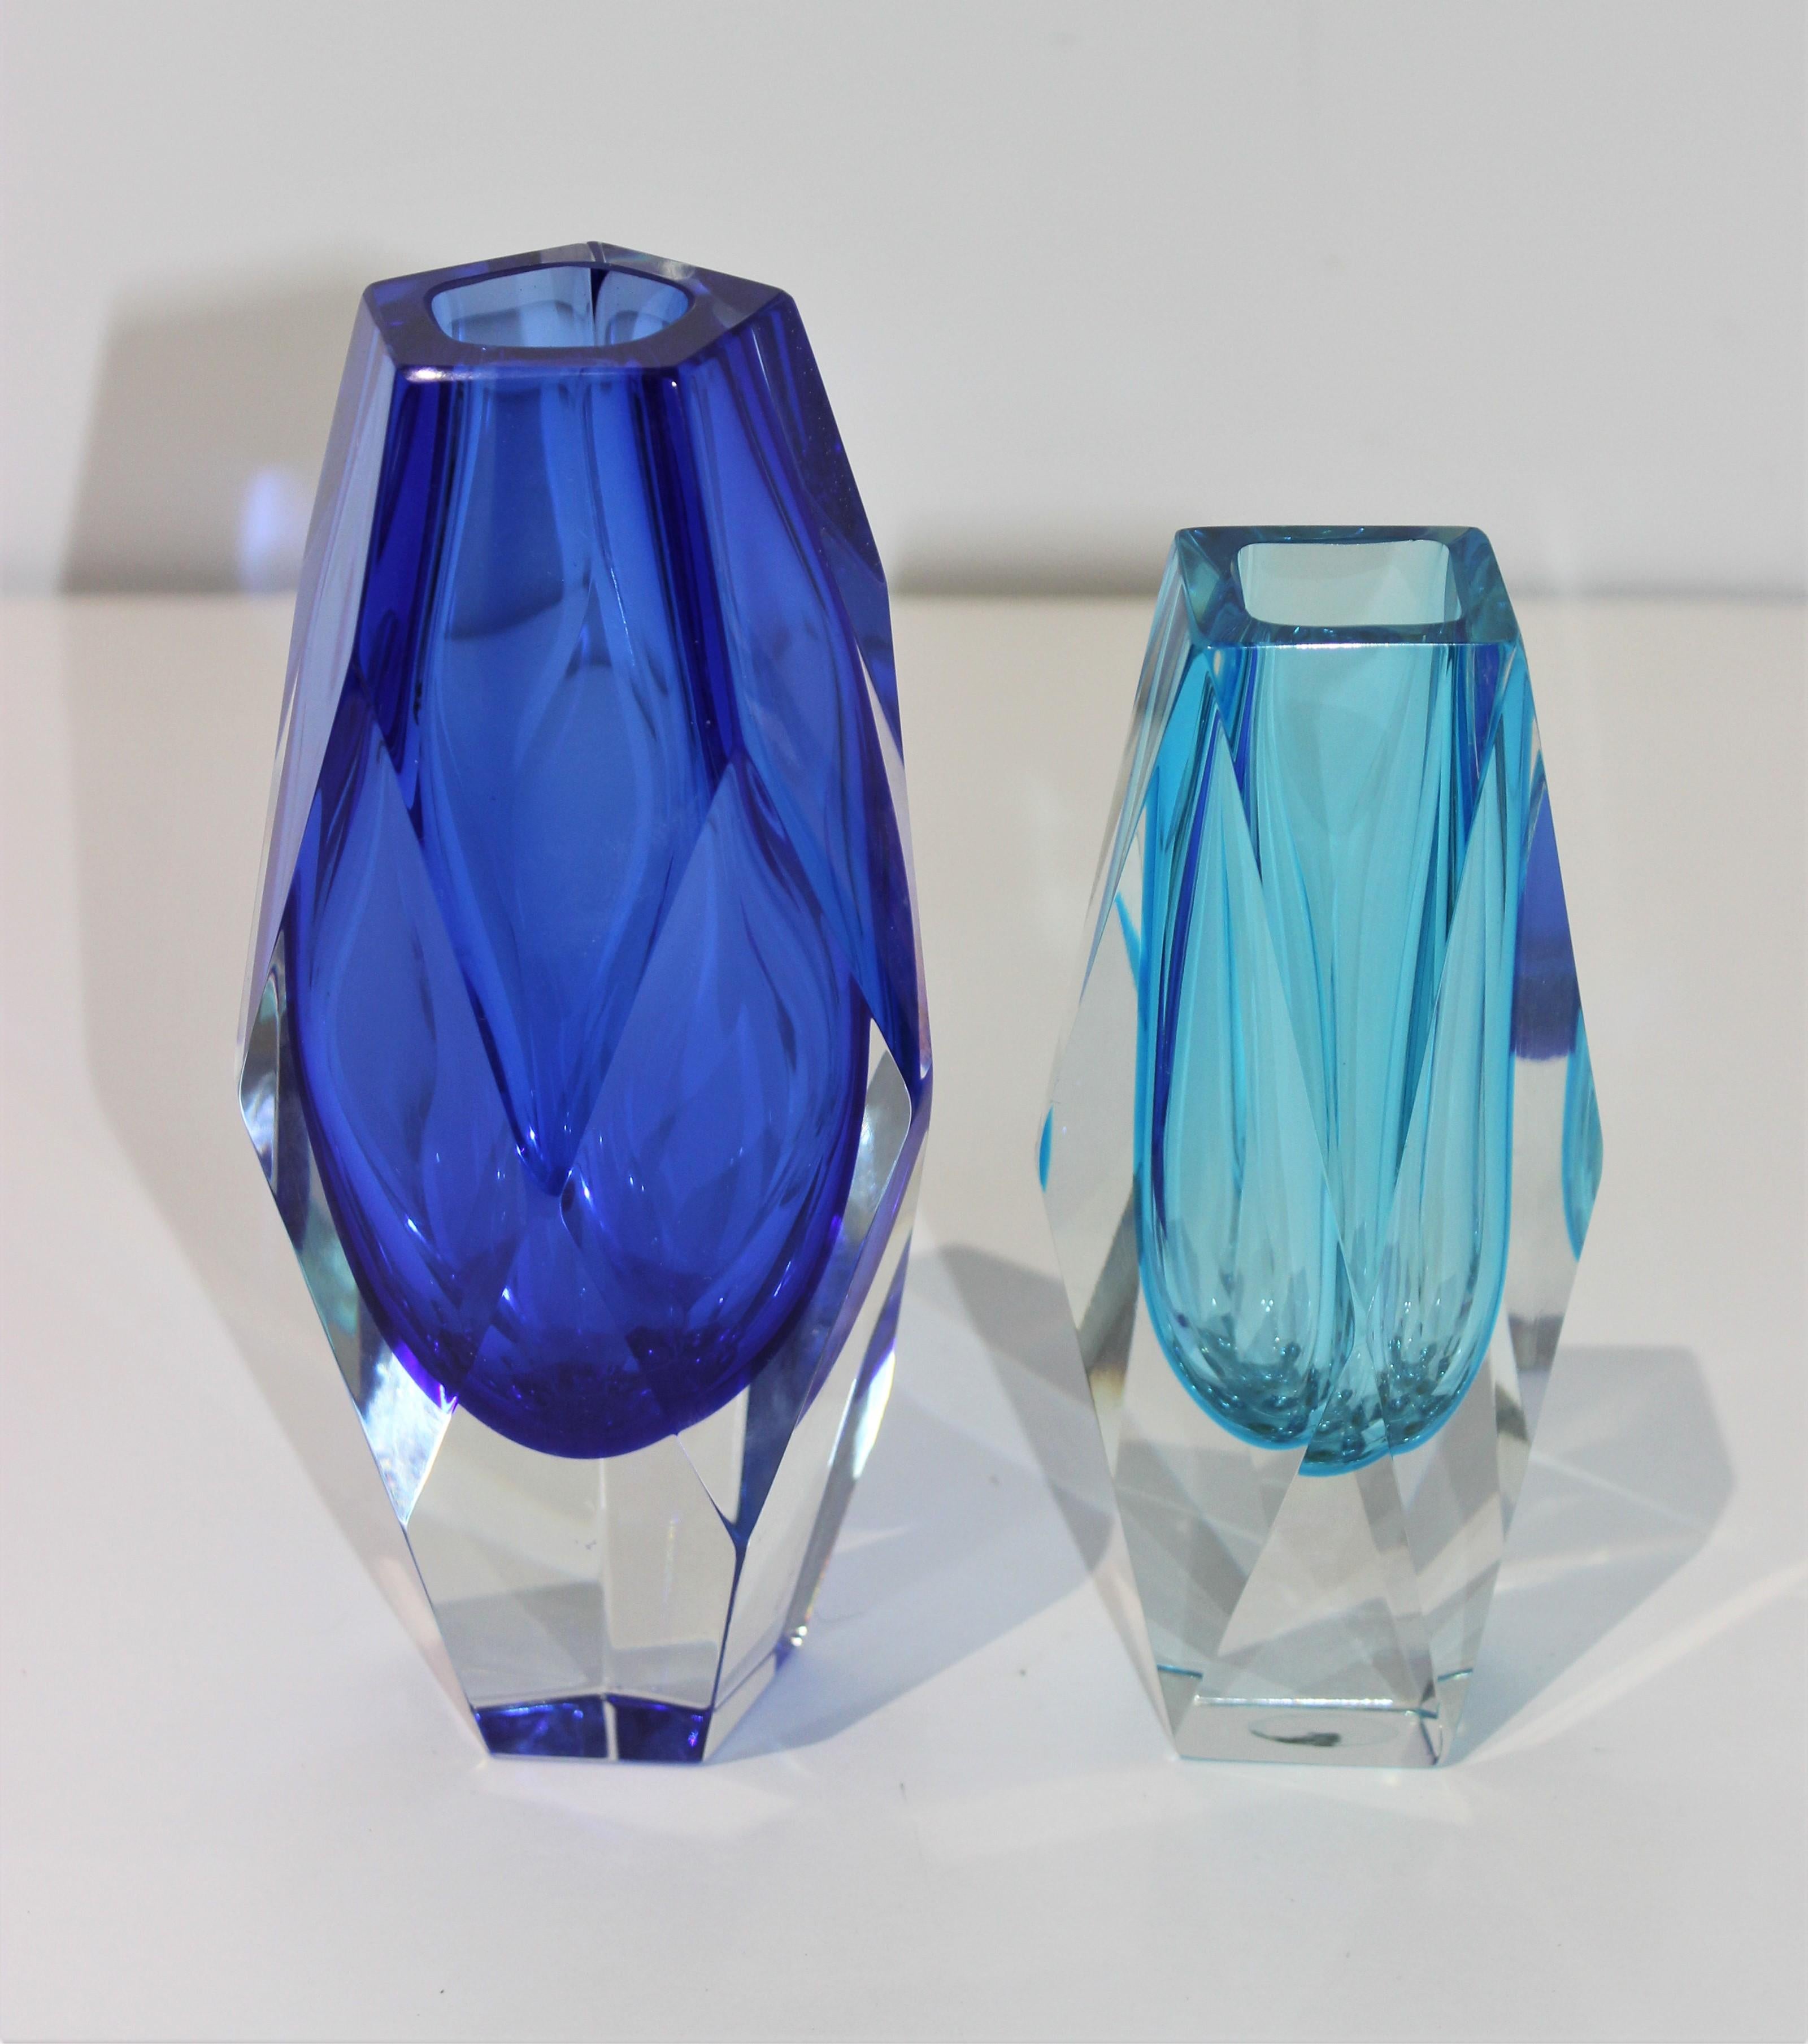 The stylish two piece set of Murano glass vases date to the 1970s and were created by Artistic Cristal. 

Note: The shorter vase retains its original label on the verso (see photo), and the taller has no label.

Note: Taller vase dimensions are